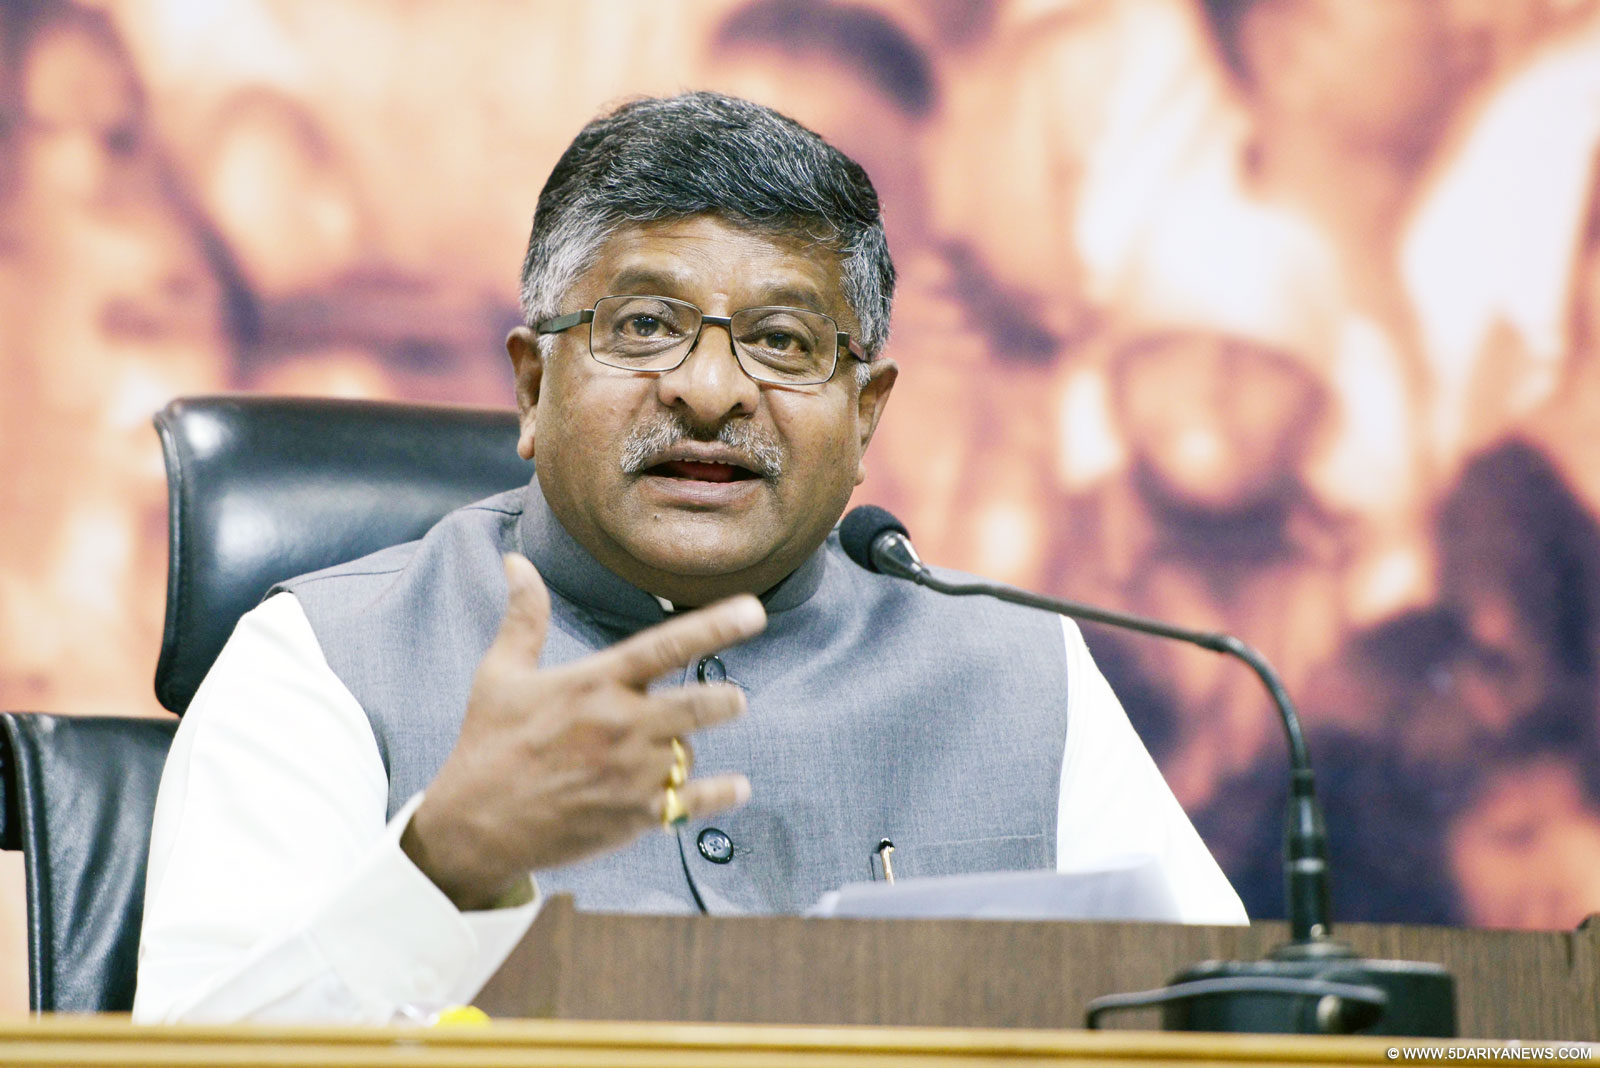 Ravi Shankar Prasad addressing a press conference on the achievements of the Ministry of C&IT during the two years of NDA Government, in New Delhi on May 30, 2016. The Secretary (Telecom), Shri J.S. Deepak and the Director General (M&C), Press Information Bureau, Shri A.P. Frank Noronha are also seen.